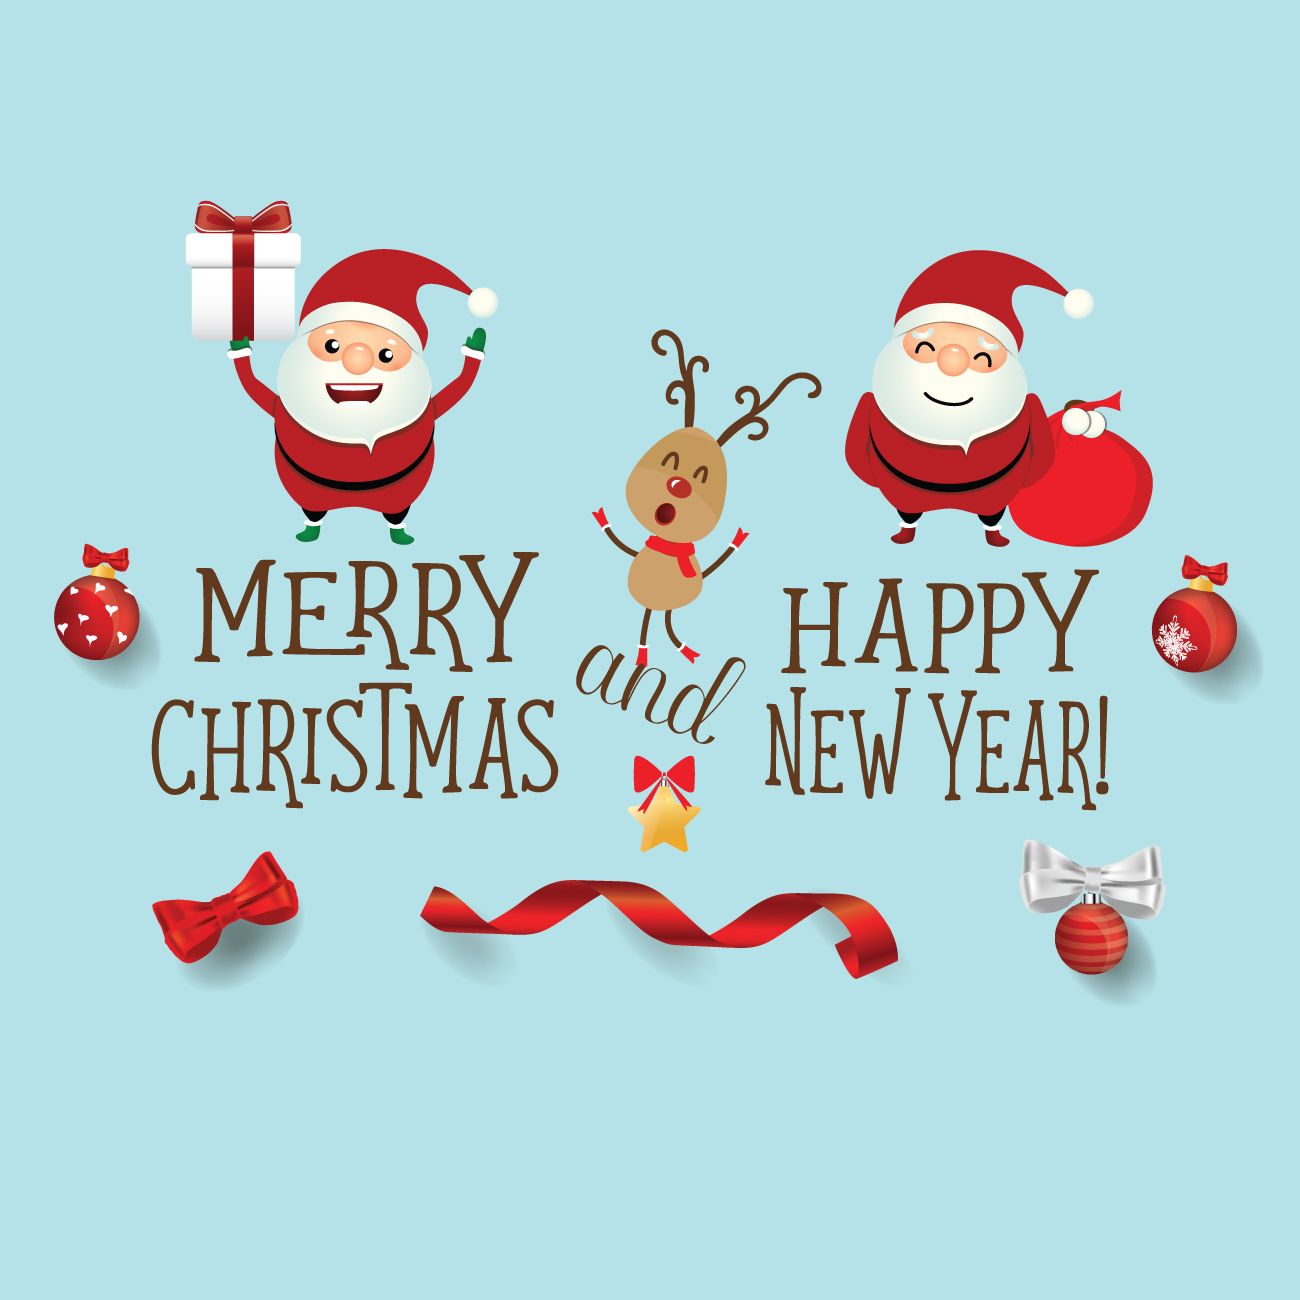 Happy New Year And Merry Christmas 2019 Wallpapers